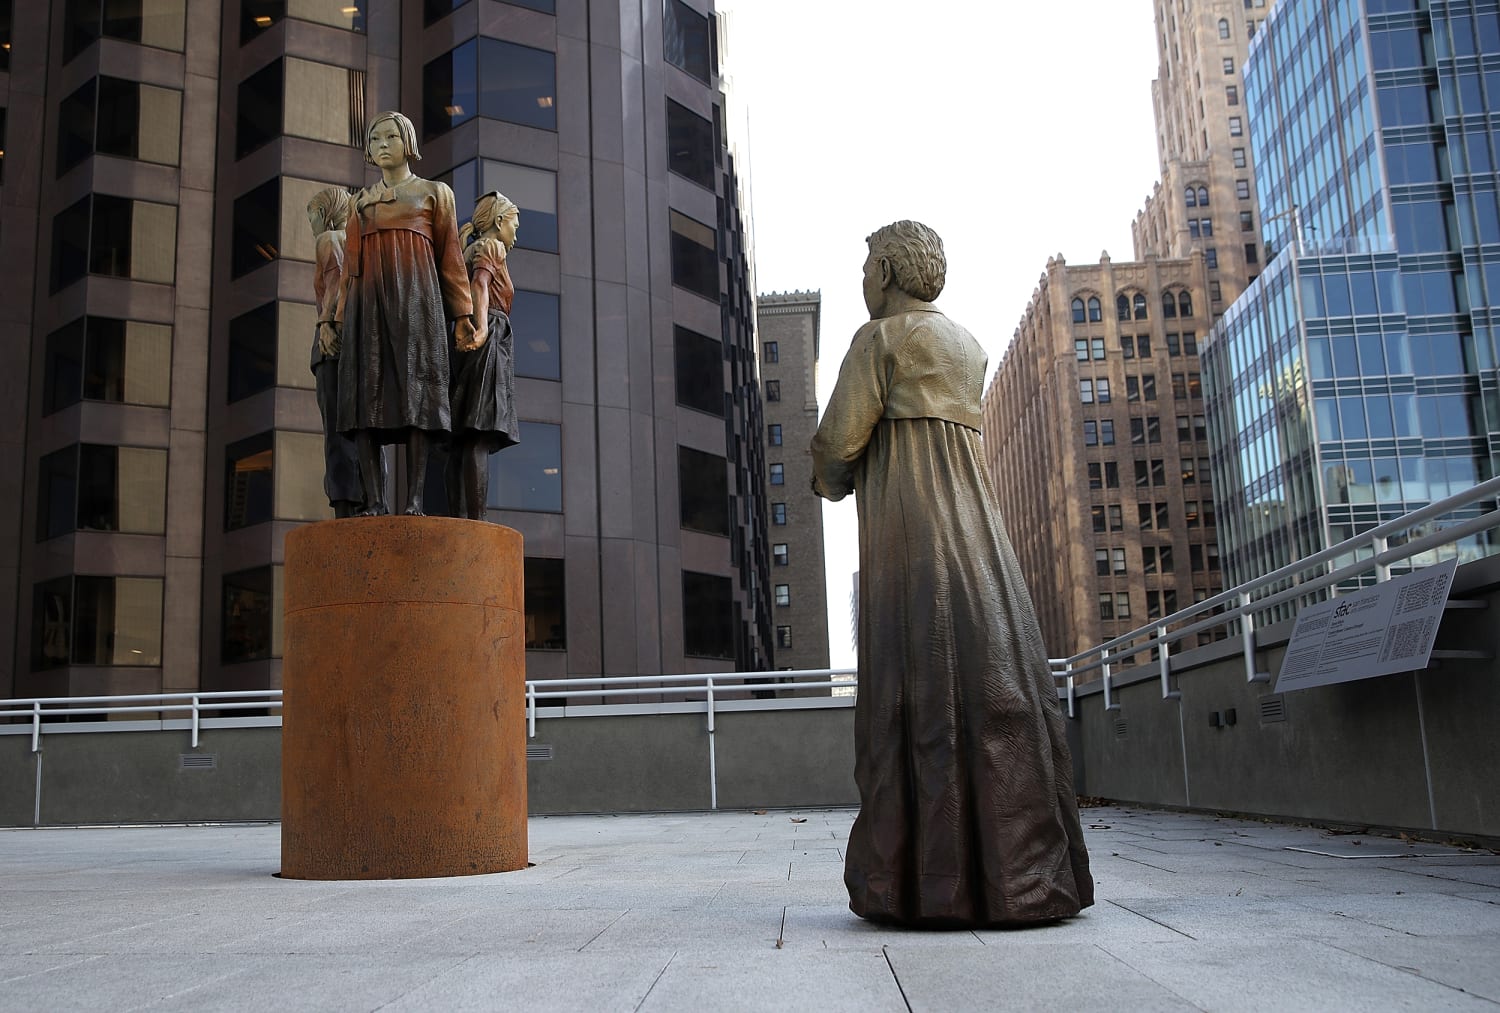 Who are the comfort women, and why are U.S.-based memorials for them controversial?